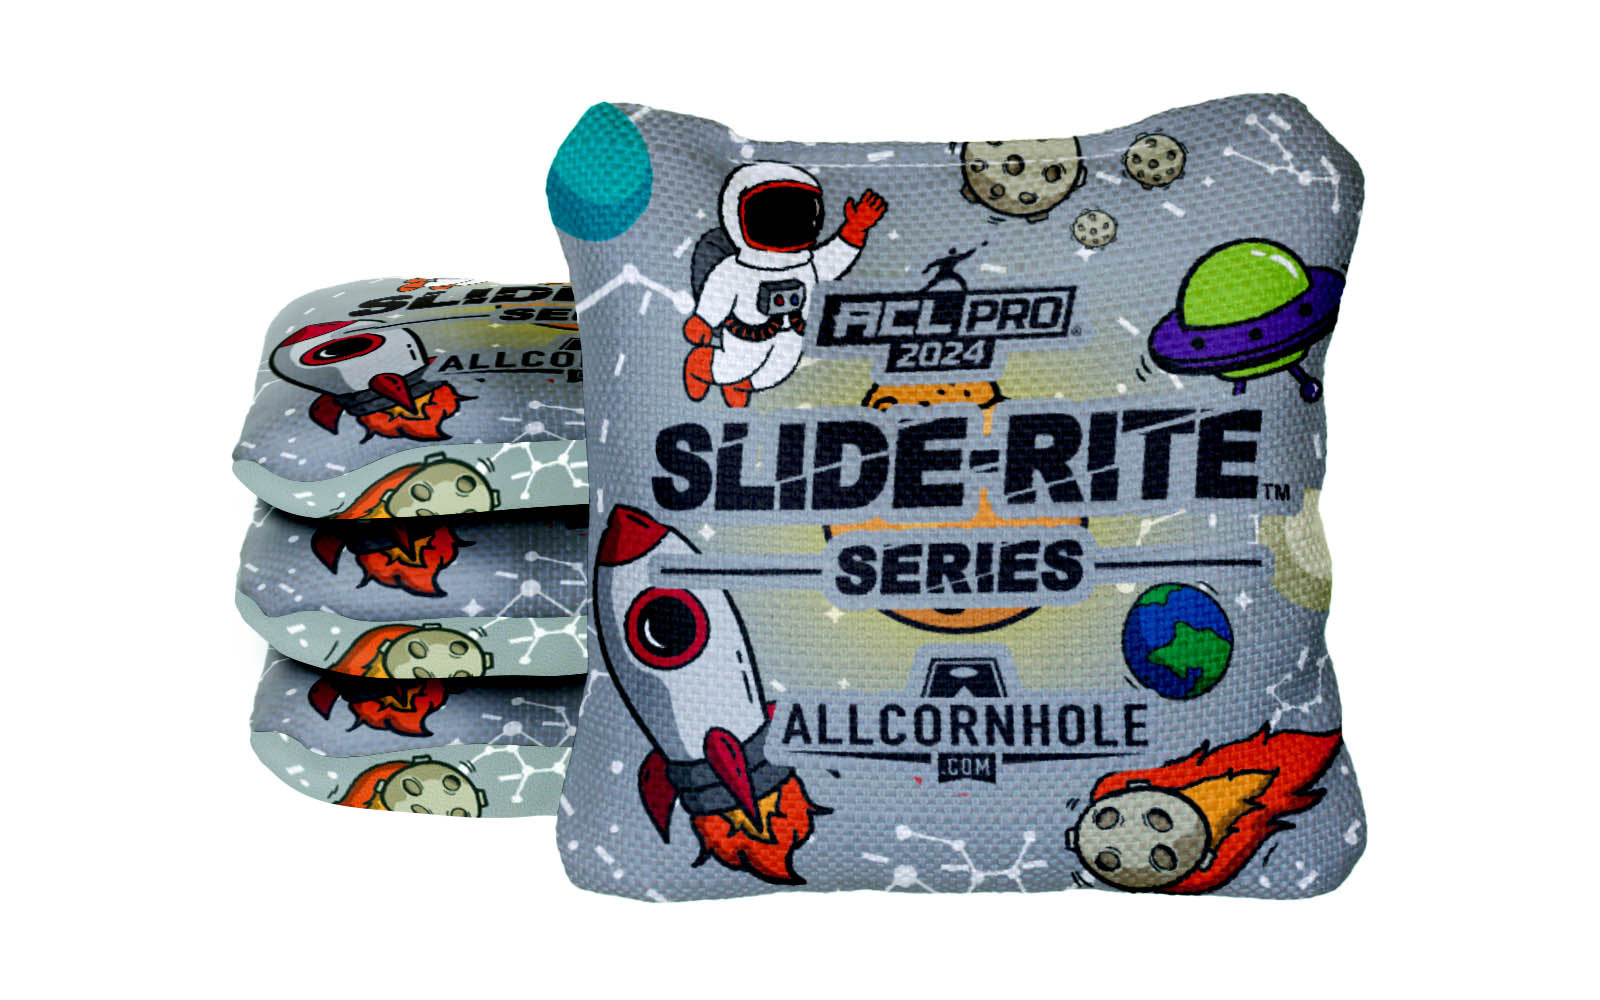 Out of This World Space Design Slide-Rite cornhole bags - SET OF 4